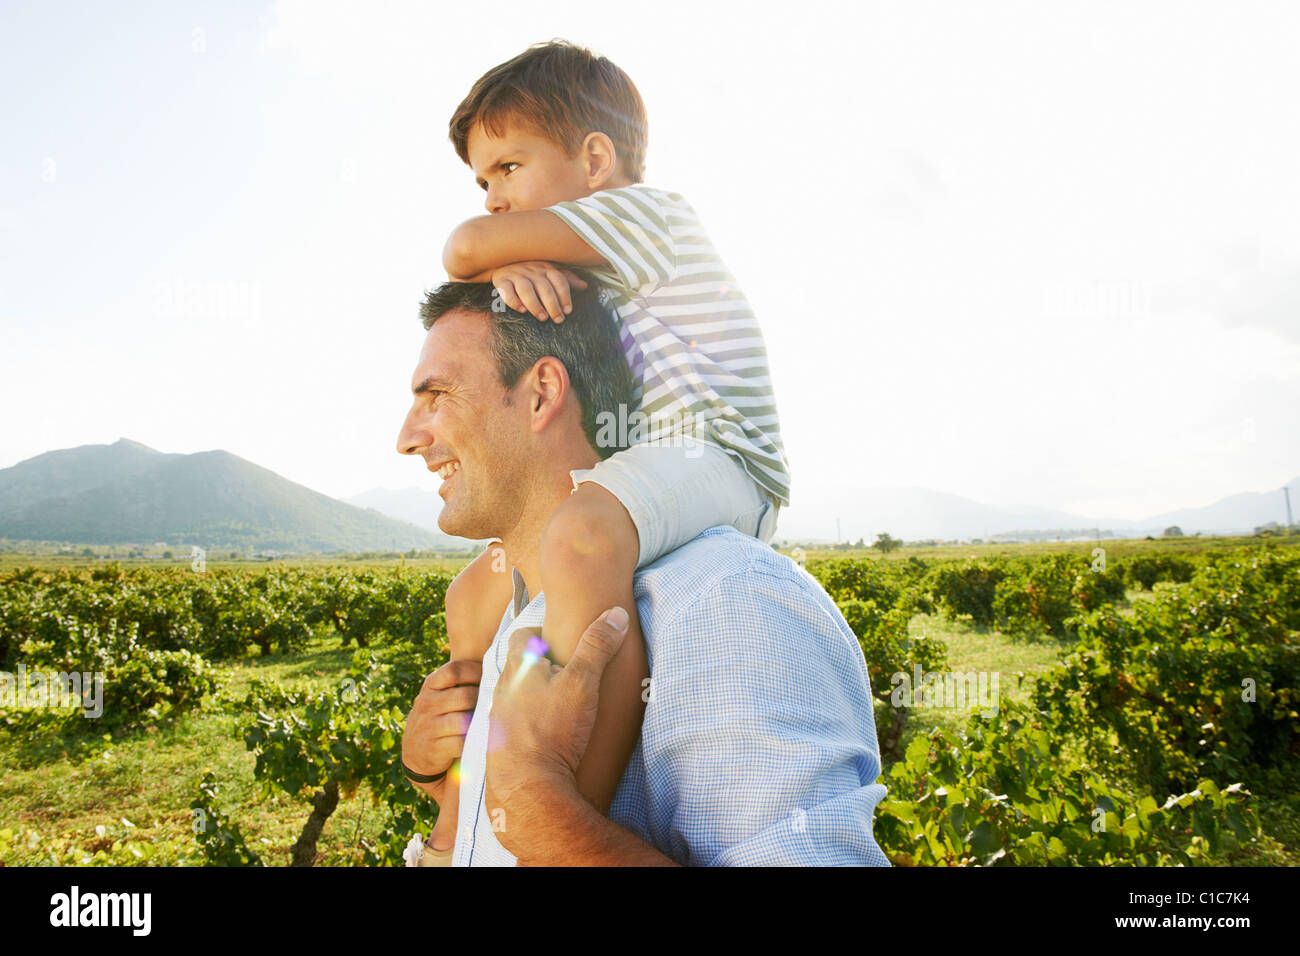 Father and son piggy backing in vineyard Stock Photo